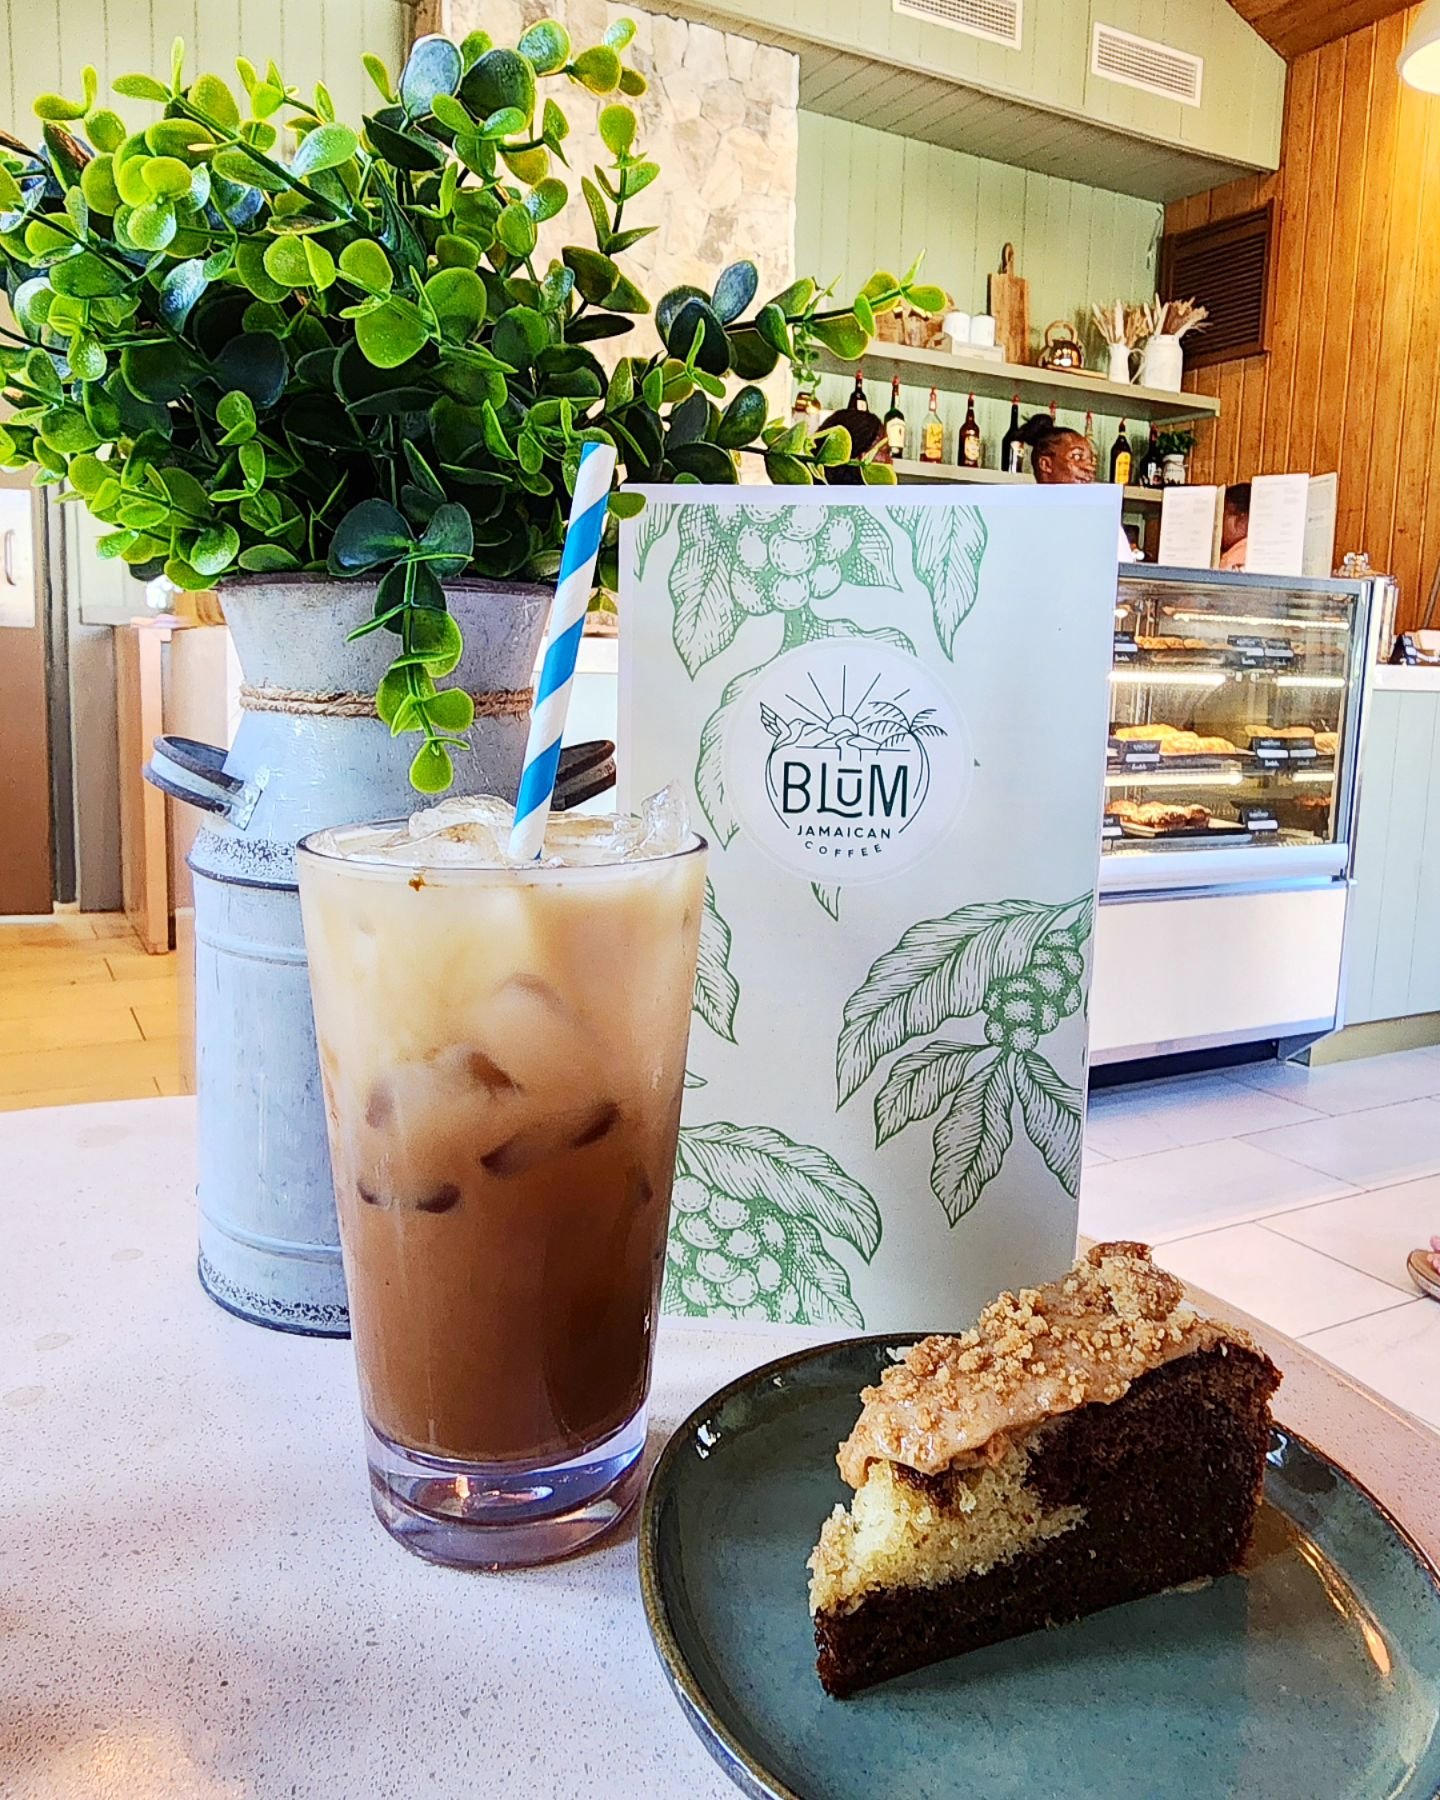 Breakfast at Blum. Iced carmel latte with delicious coffee cake for the win! This coffee shop at Sandals Saint Vincent is a perfect stop in the morning for a light, pastry breakfast and Blue Mountain coffee. Of course you will want to pop back in the